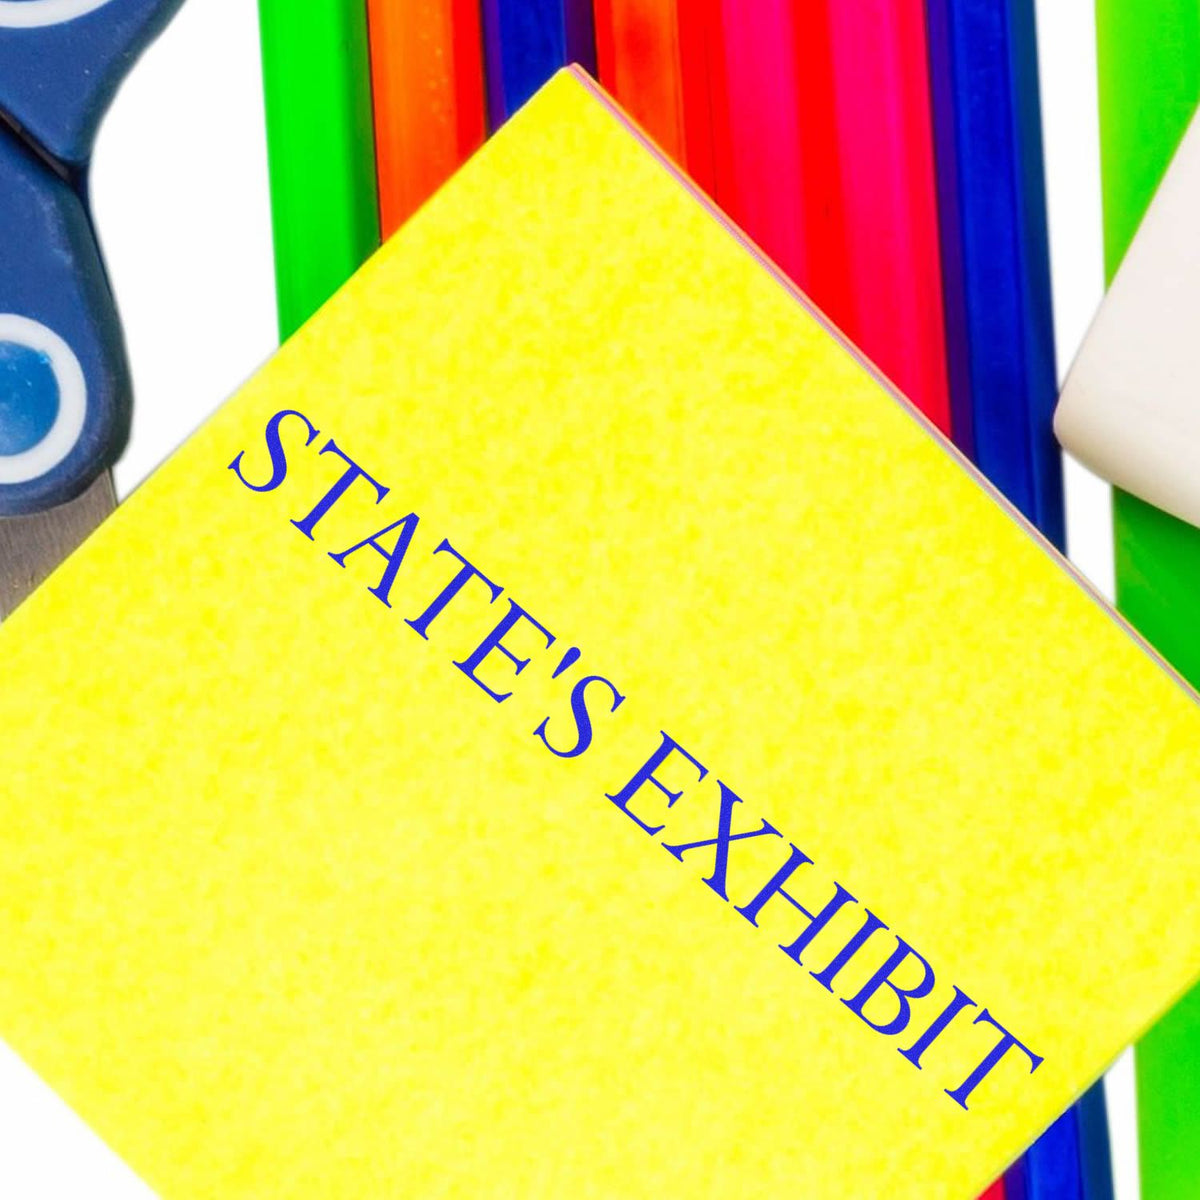 States Exhibit Legal Rubber Stamp In Use Photo